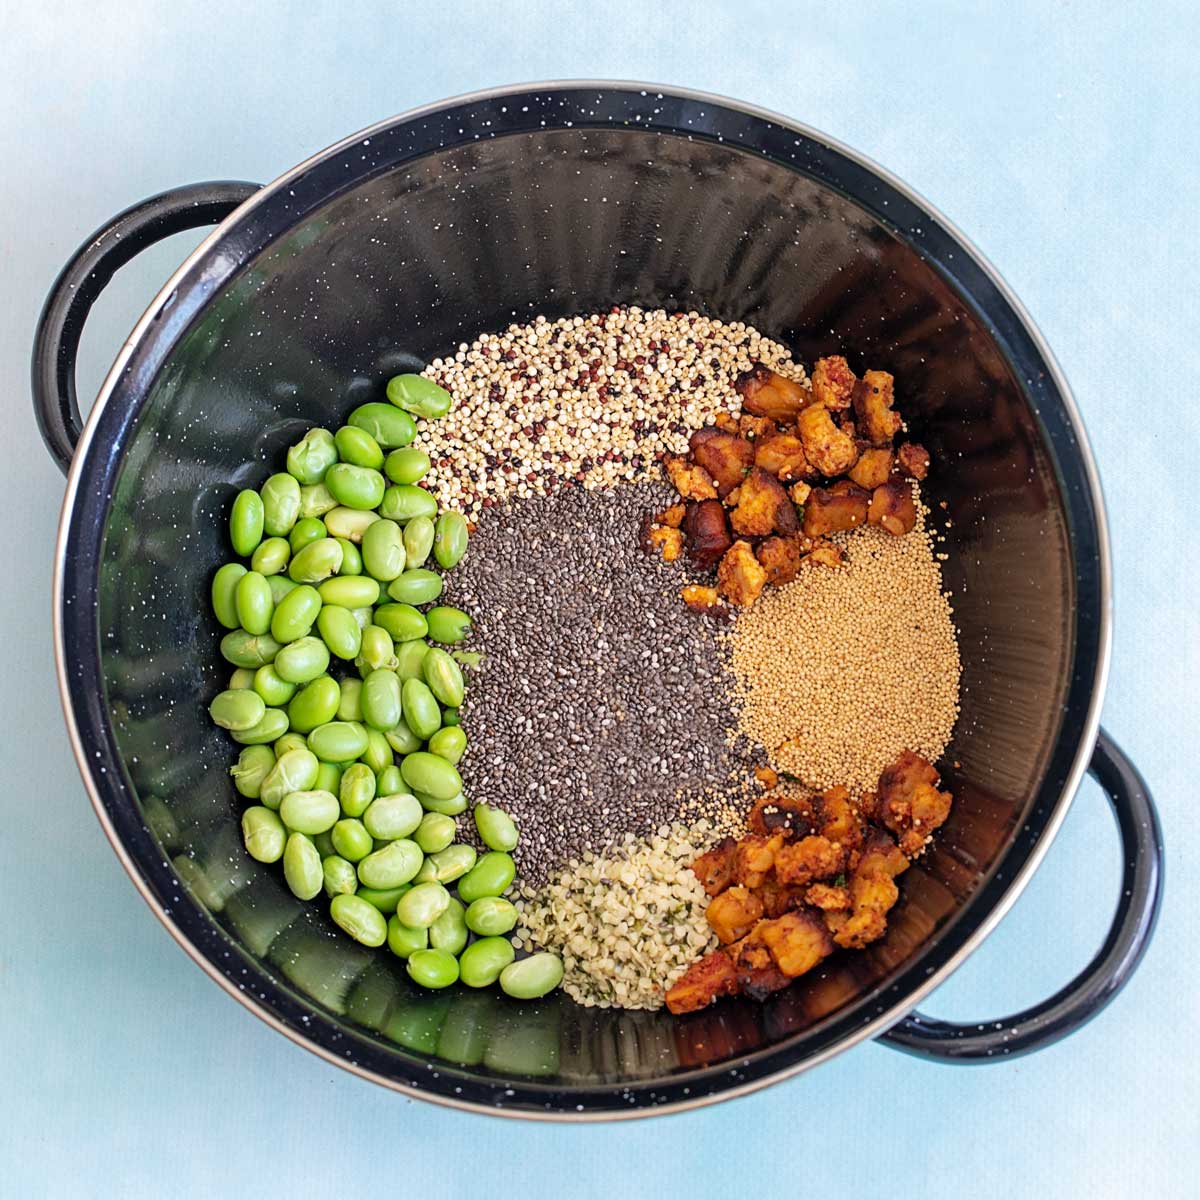 Top view of a black wok filled with edamame, chia seeds, hemp seeds, quinoa, amaranth and tofu crumbles.